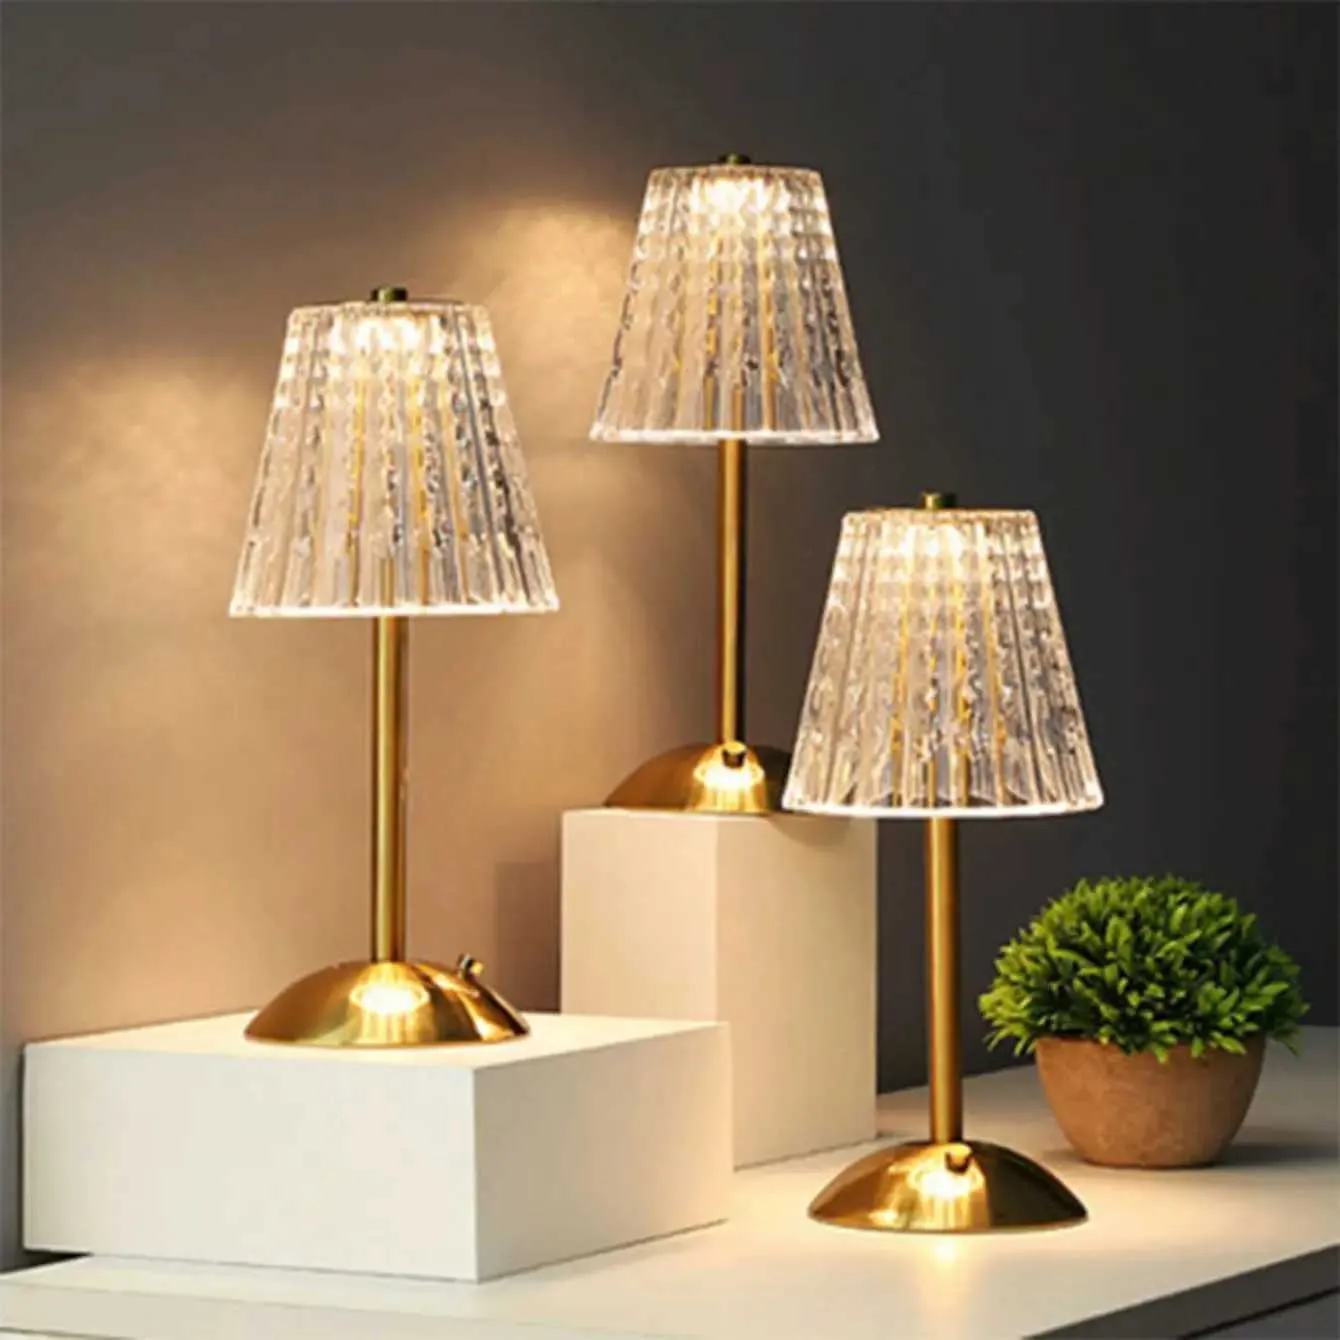 Table Lamps Crystal retro table lamp bedroom bedside lamp luxurious atmosphere lamp rechargeable dimming LED light